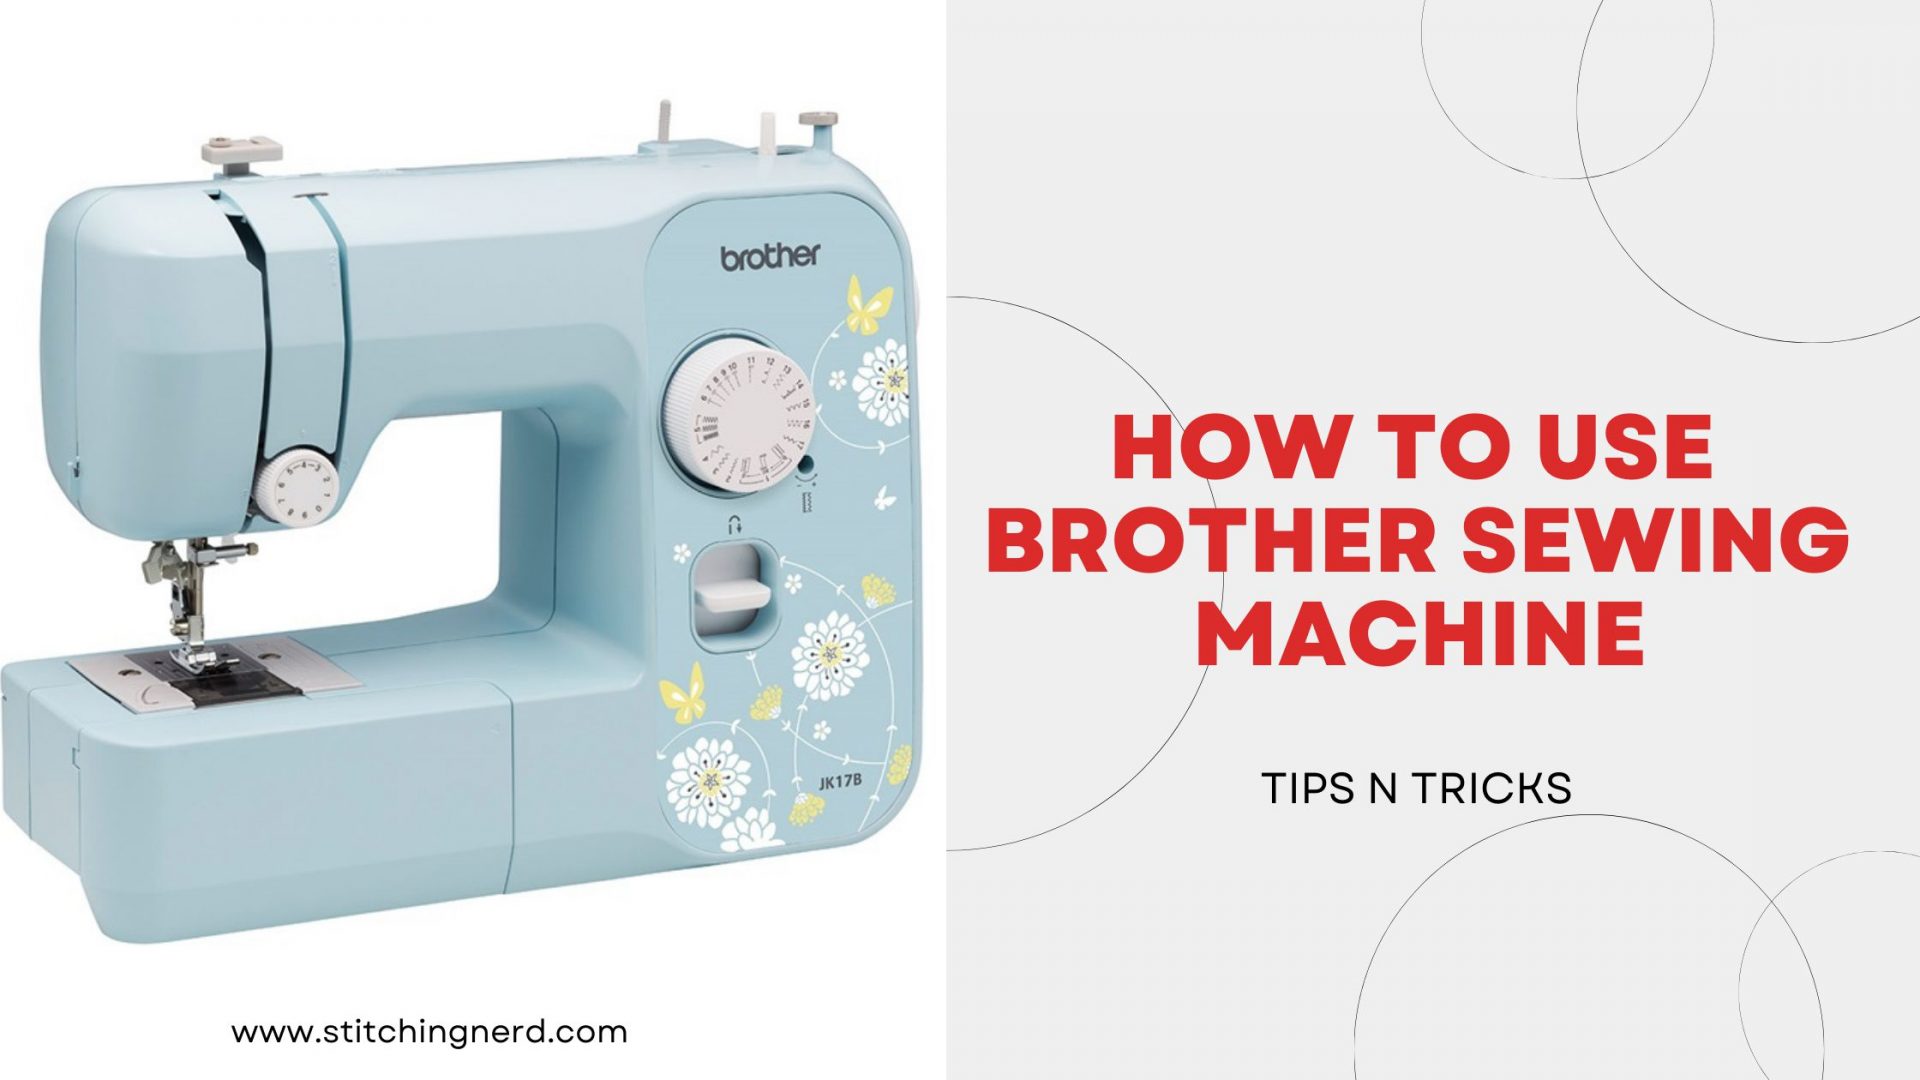 How To Use Brother Sewing Machine